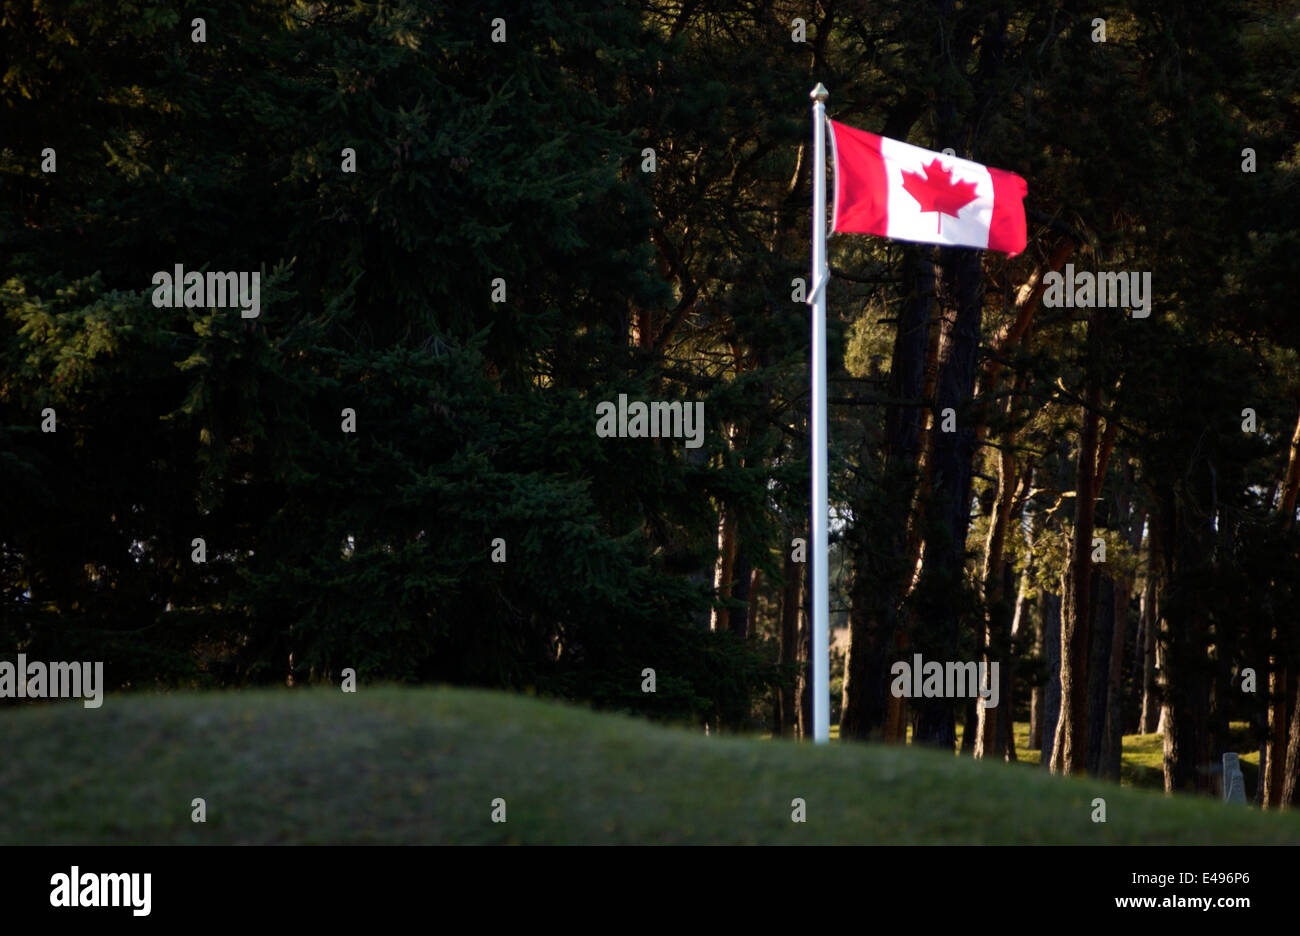 AJAXNETPHOTO. 2005. VIMY RIDGE, FRANCE - SOMME - PICARDY-THE CANADIAN NATIONAL FLAG FLIES OVER THE BATTLE TRENCHES OF THE GREAT WAR. PHOTO:JONATHAN EASTLAND/AJAX REF:D52110/575 Stock Photo